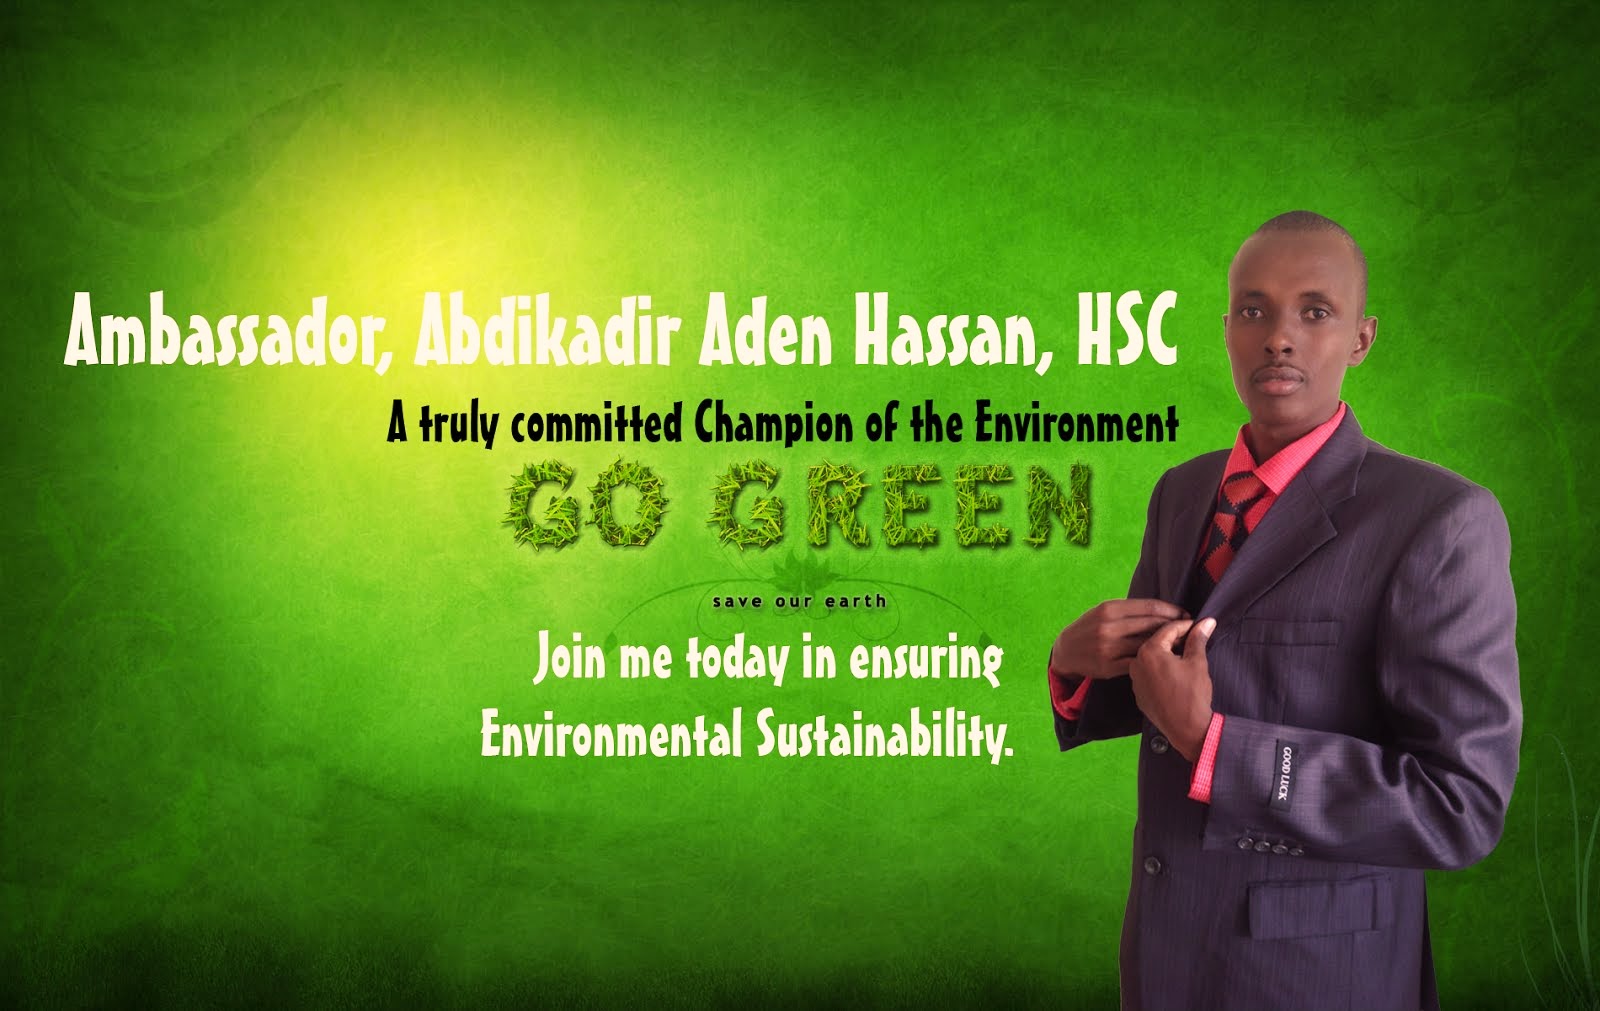 Join me in ensuring Environmental Sustainability